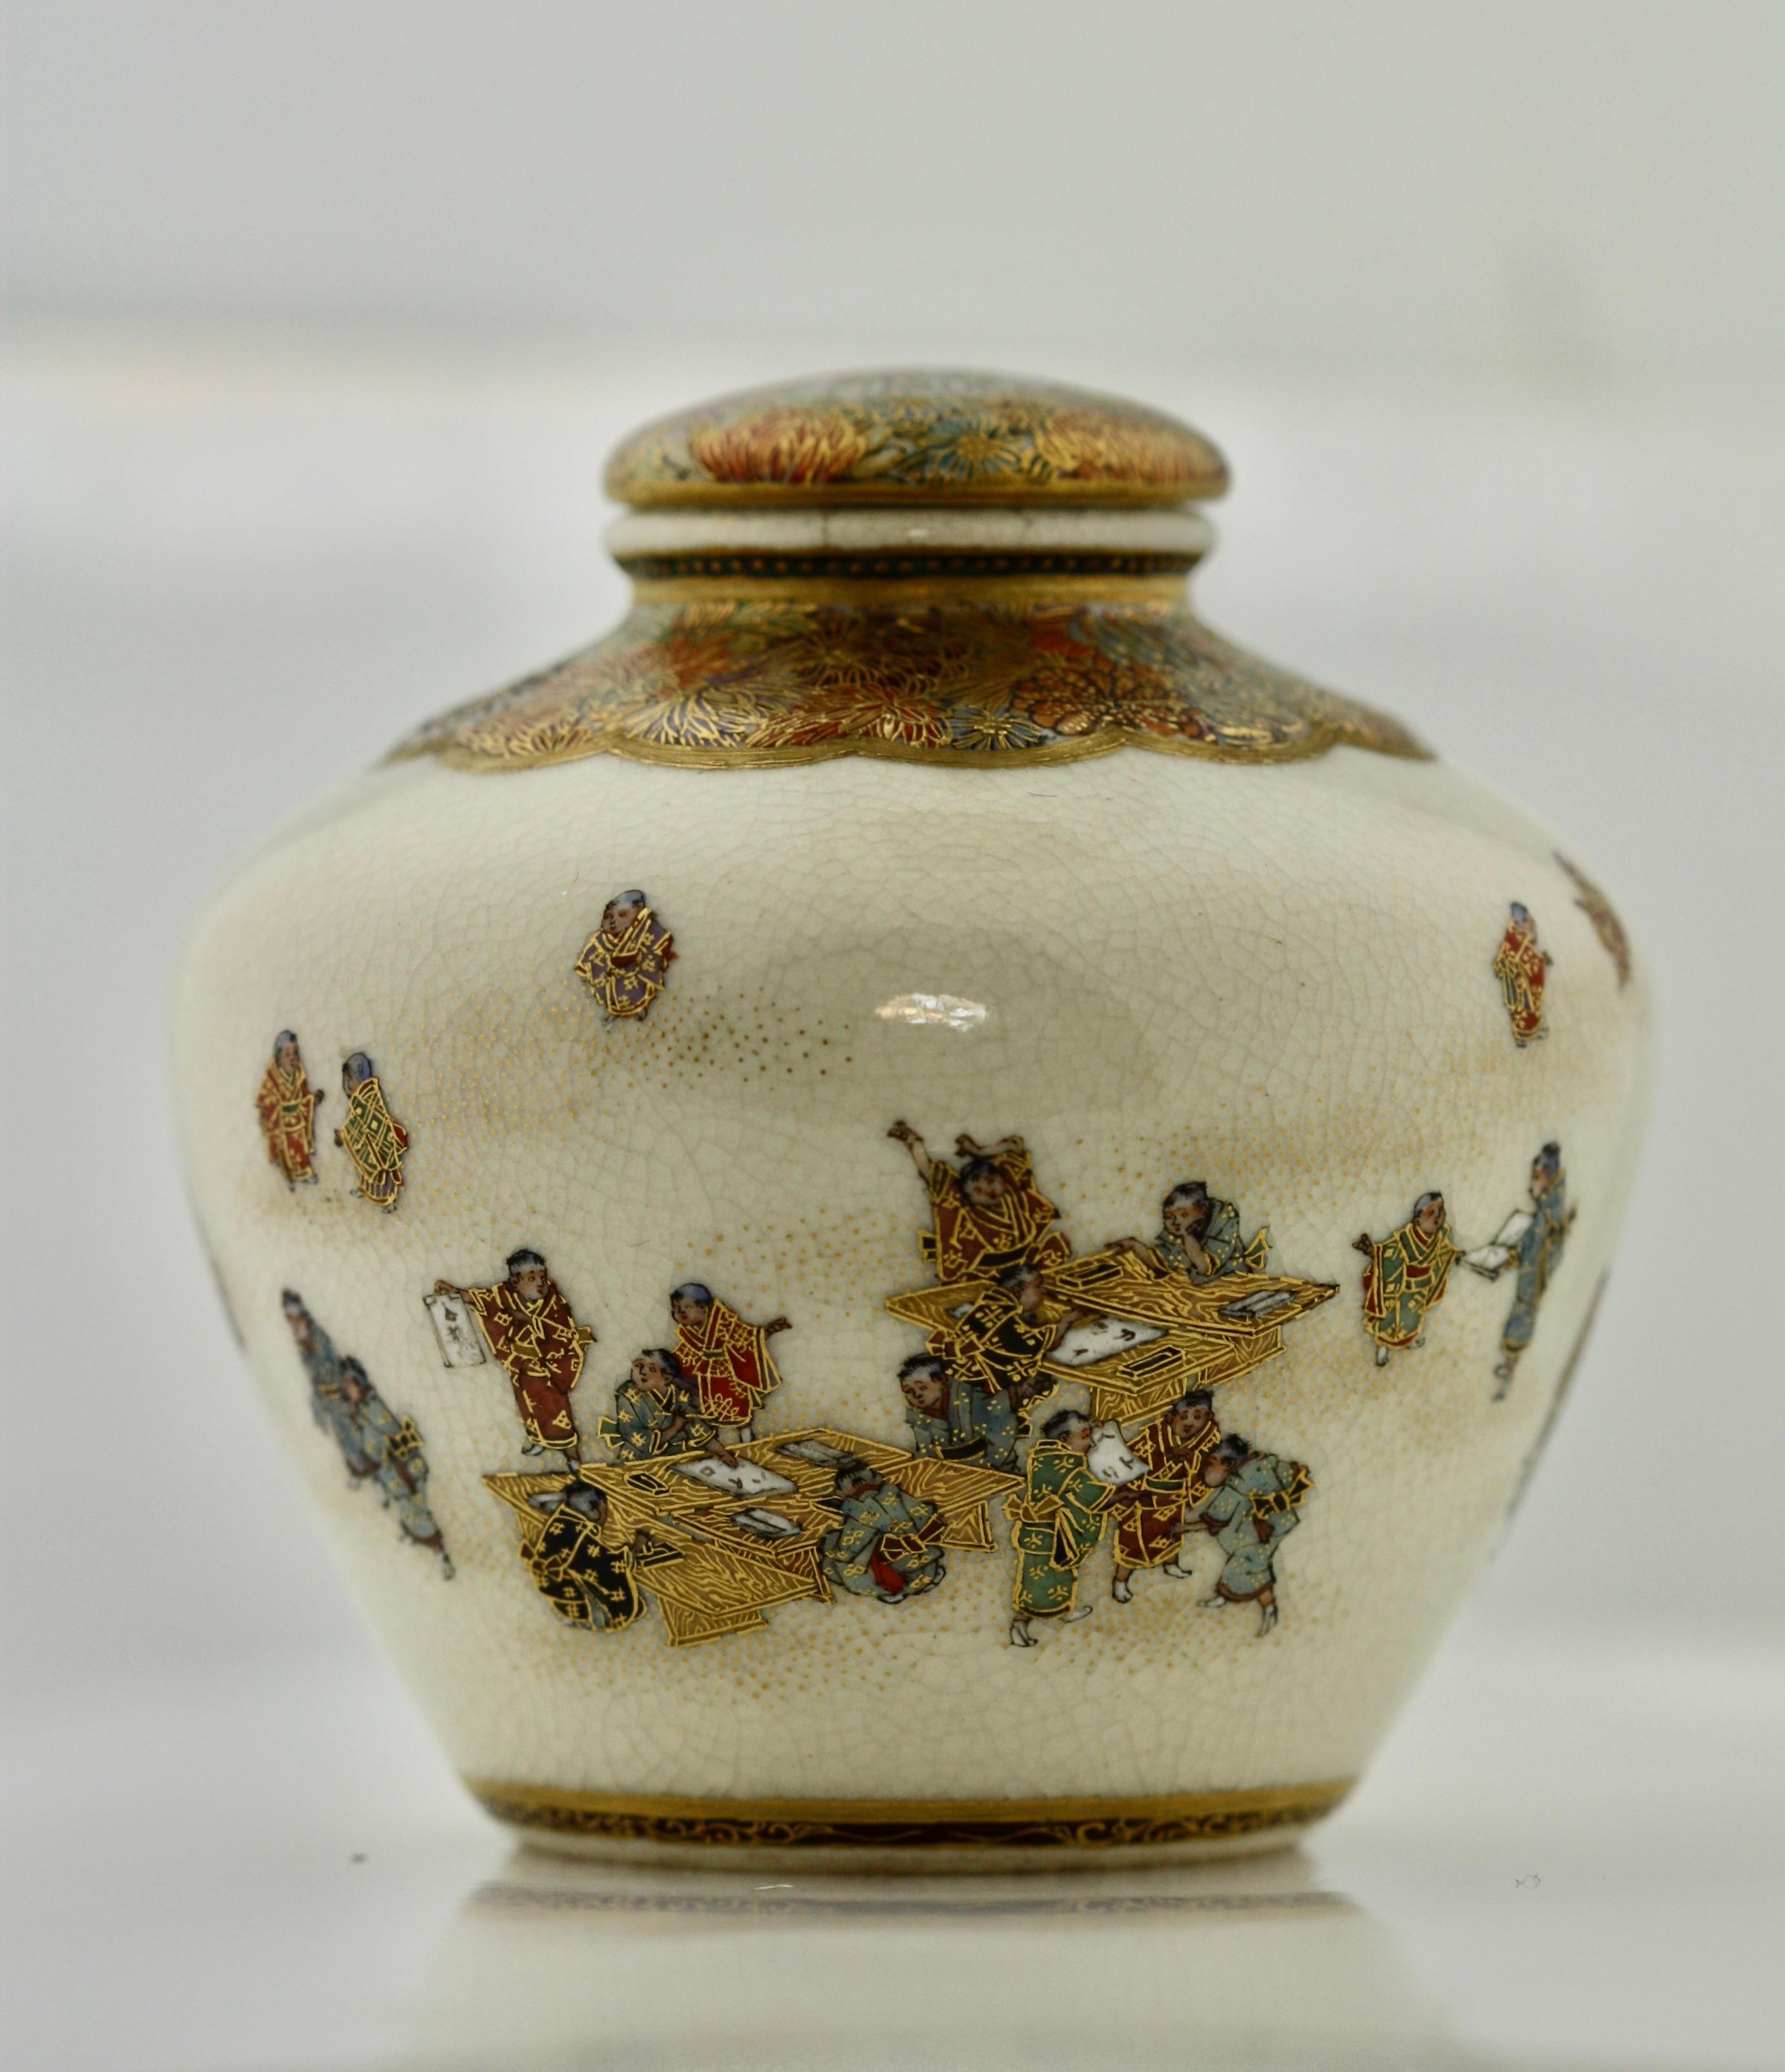 A Satsuma covered earthenware vase by Yabu Meizan,
Osaka, 1853-1934,
the compressed ovoid jar fitted with a cover in the manner of a tea jar decorated in polychrome enamels and gilt over a clear, crackled glaze, delicately painted with a